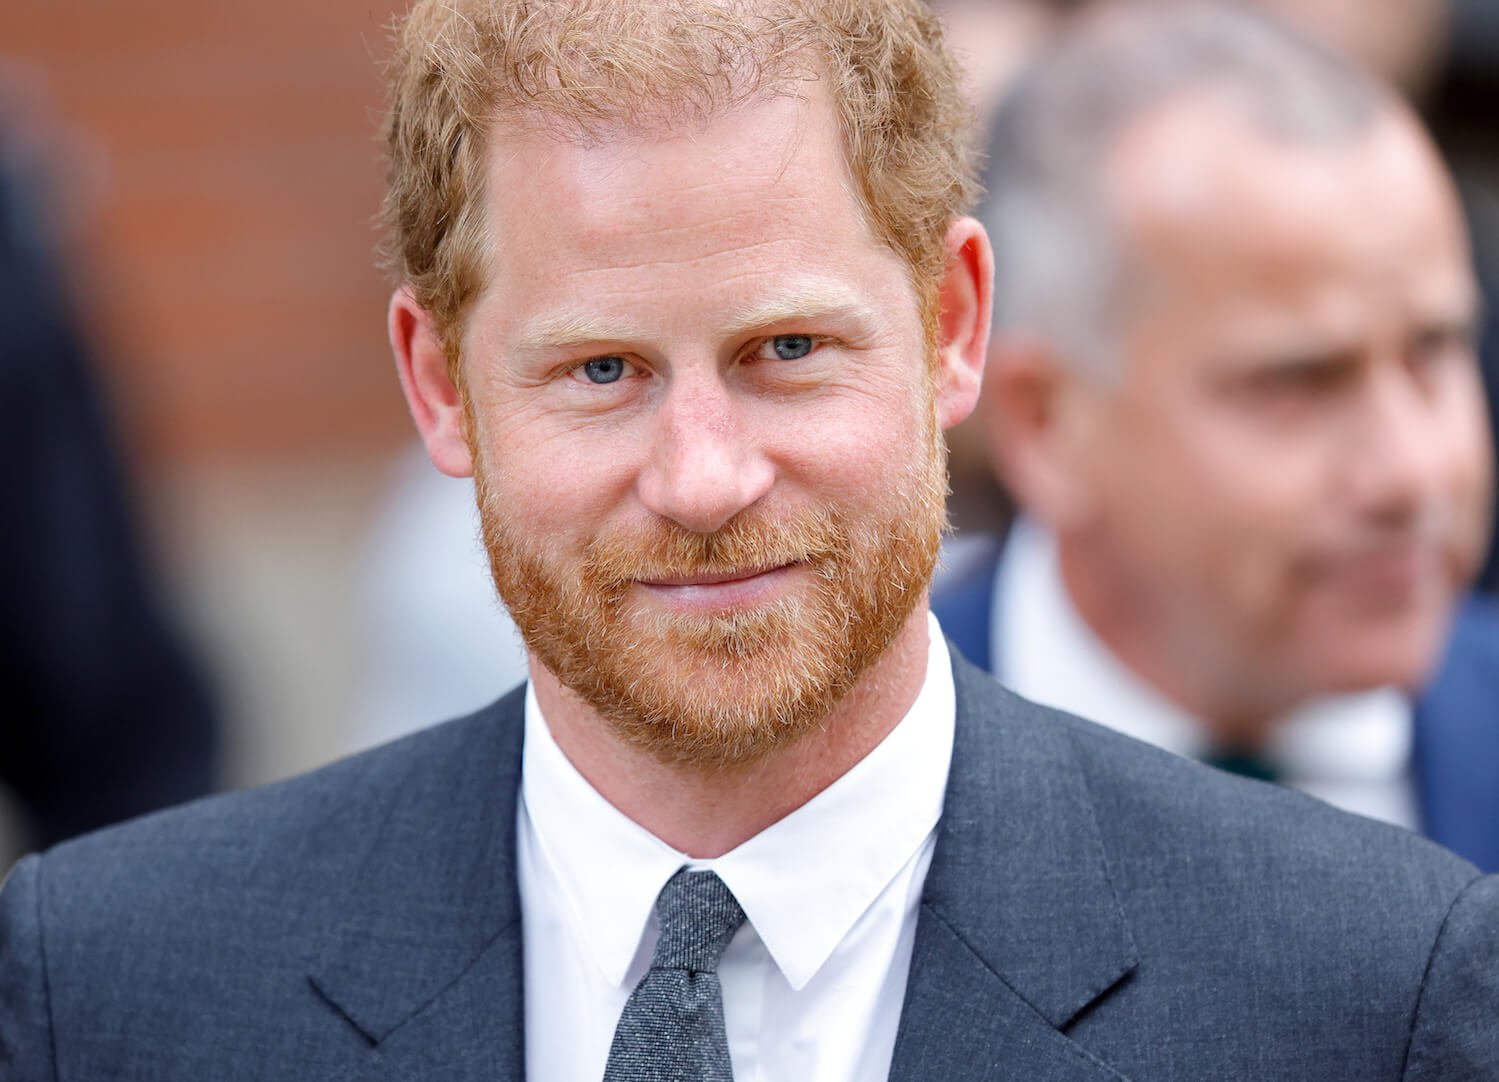 Prince Harry smiles slightly while wearing a suit and tie